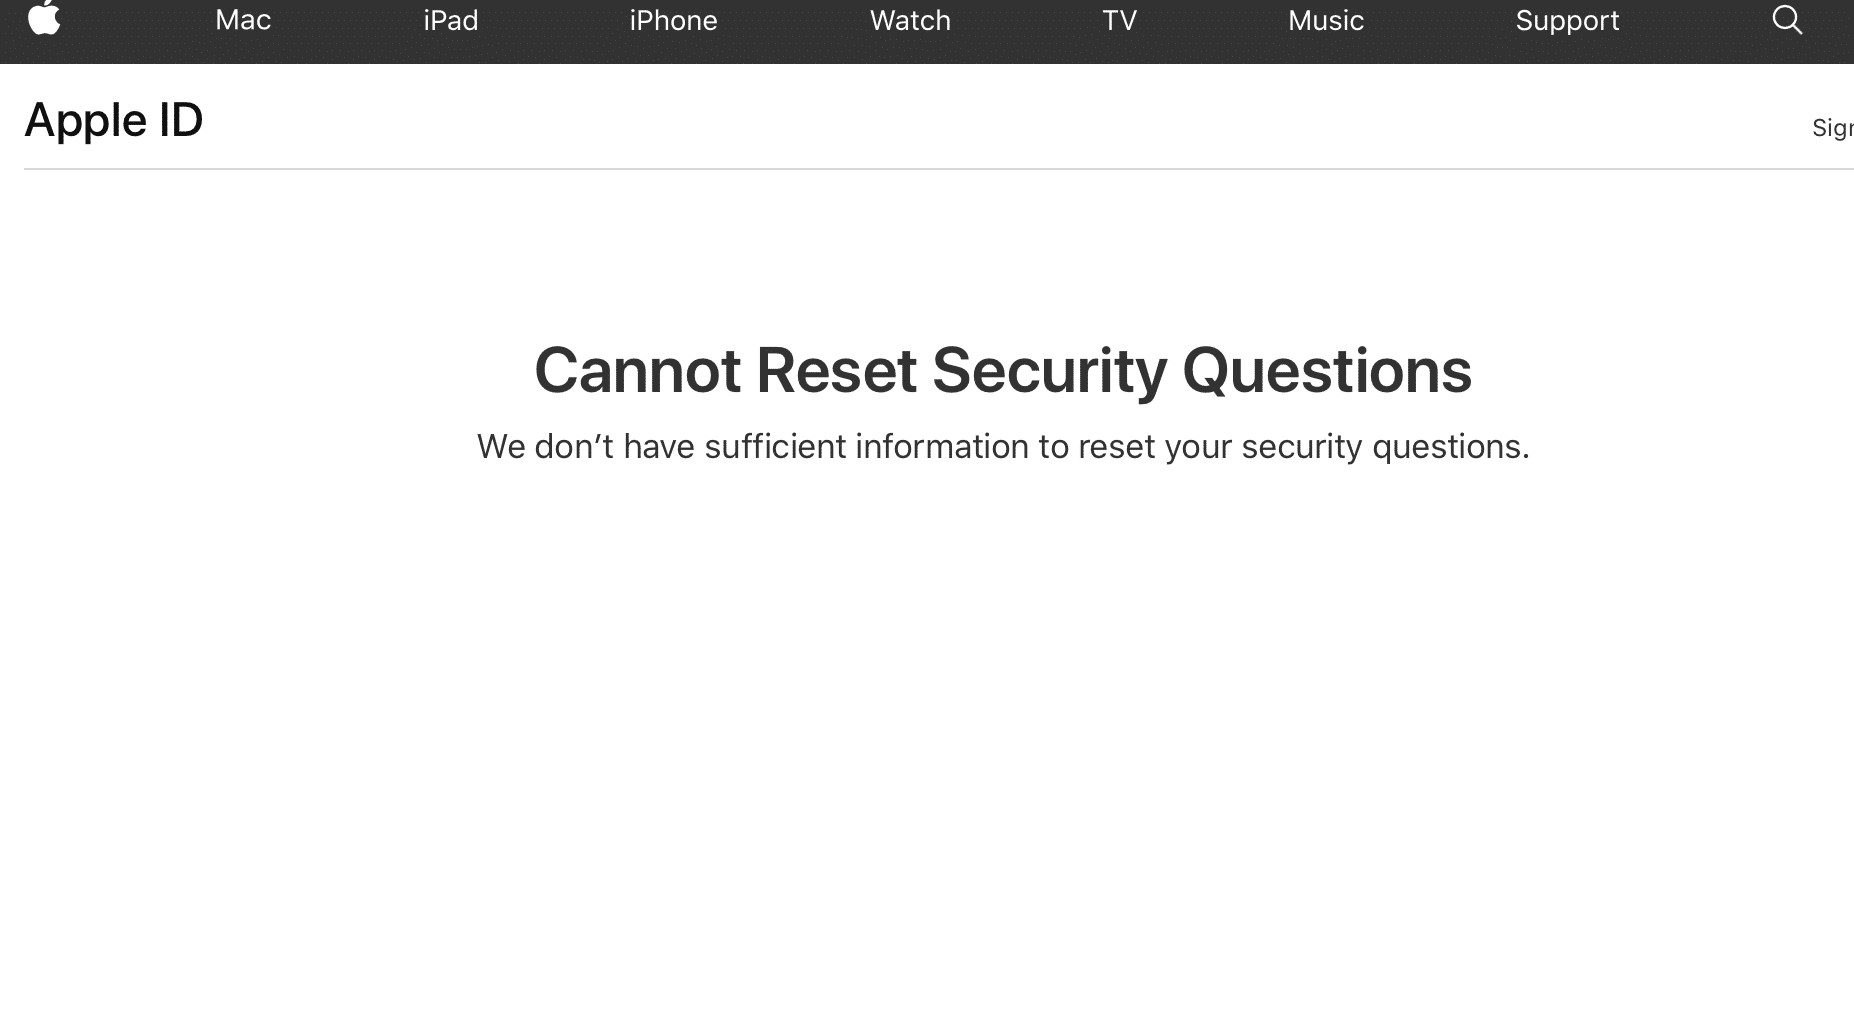 opportunity to regain access through a series of Security Questions | How to Access Apple Account